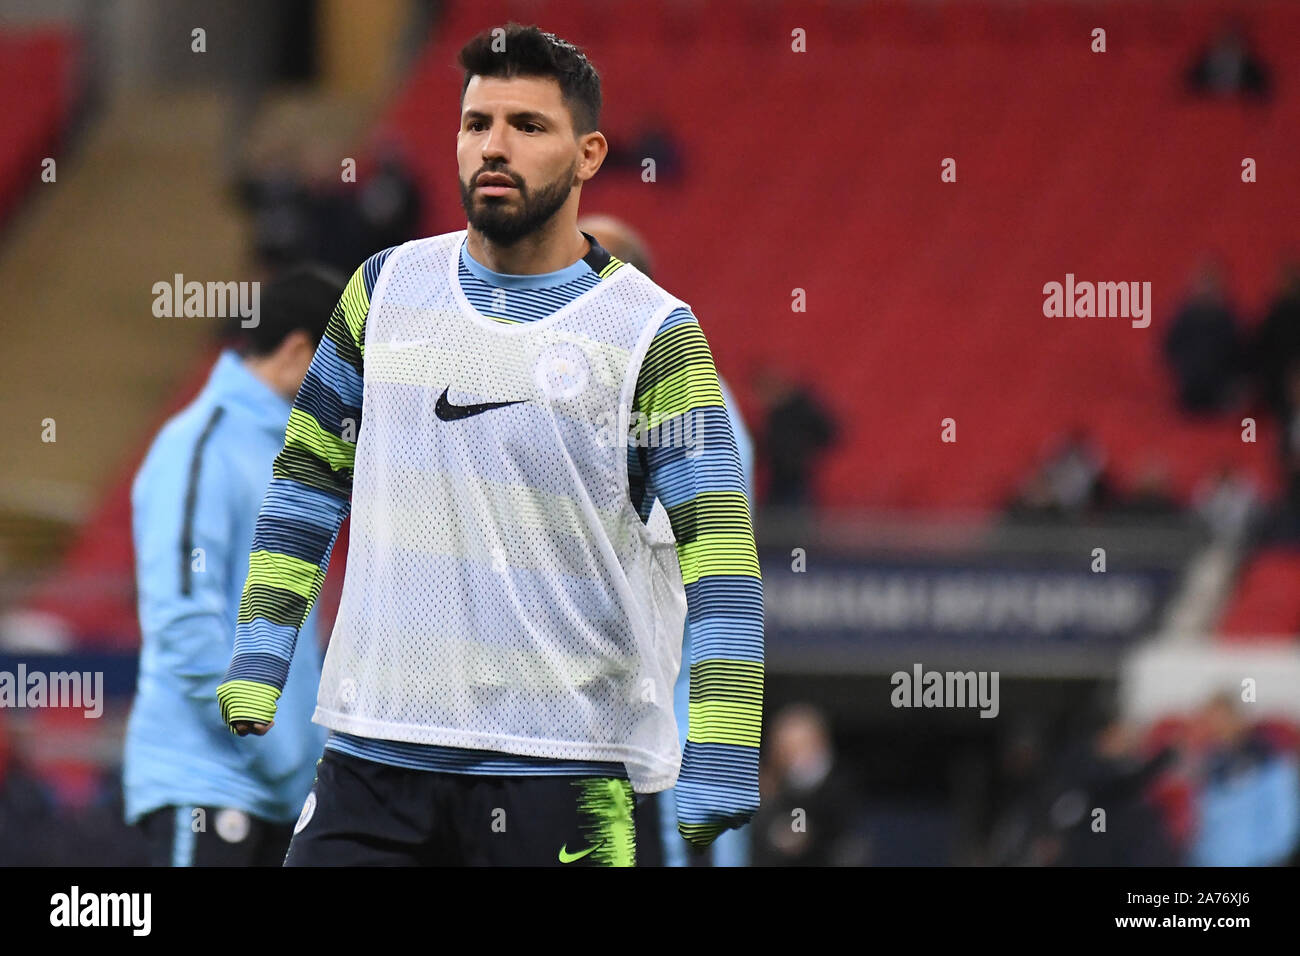 LONDON, ENGLAND - OCTOBER 29, 2018: Sergio Aguero of City pictured prior to the 2018/19 English Premier League game between Tottenham Hotspur and Manchester City at Wembley Stadium. Stock Photo